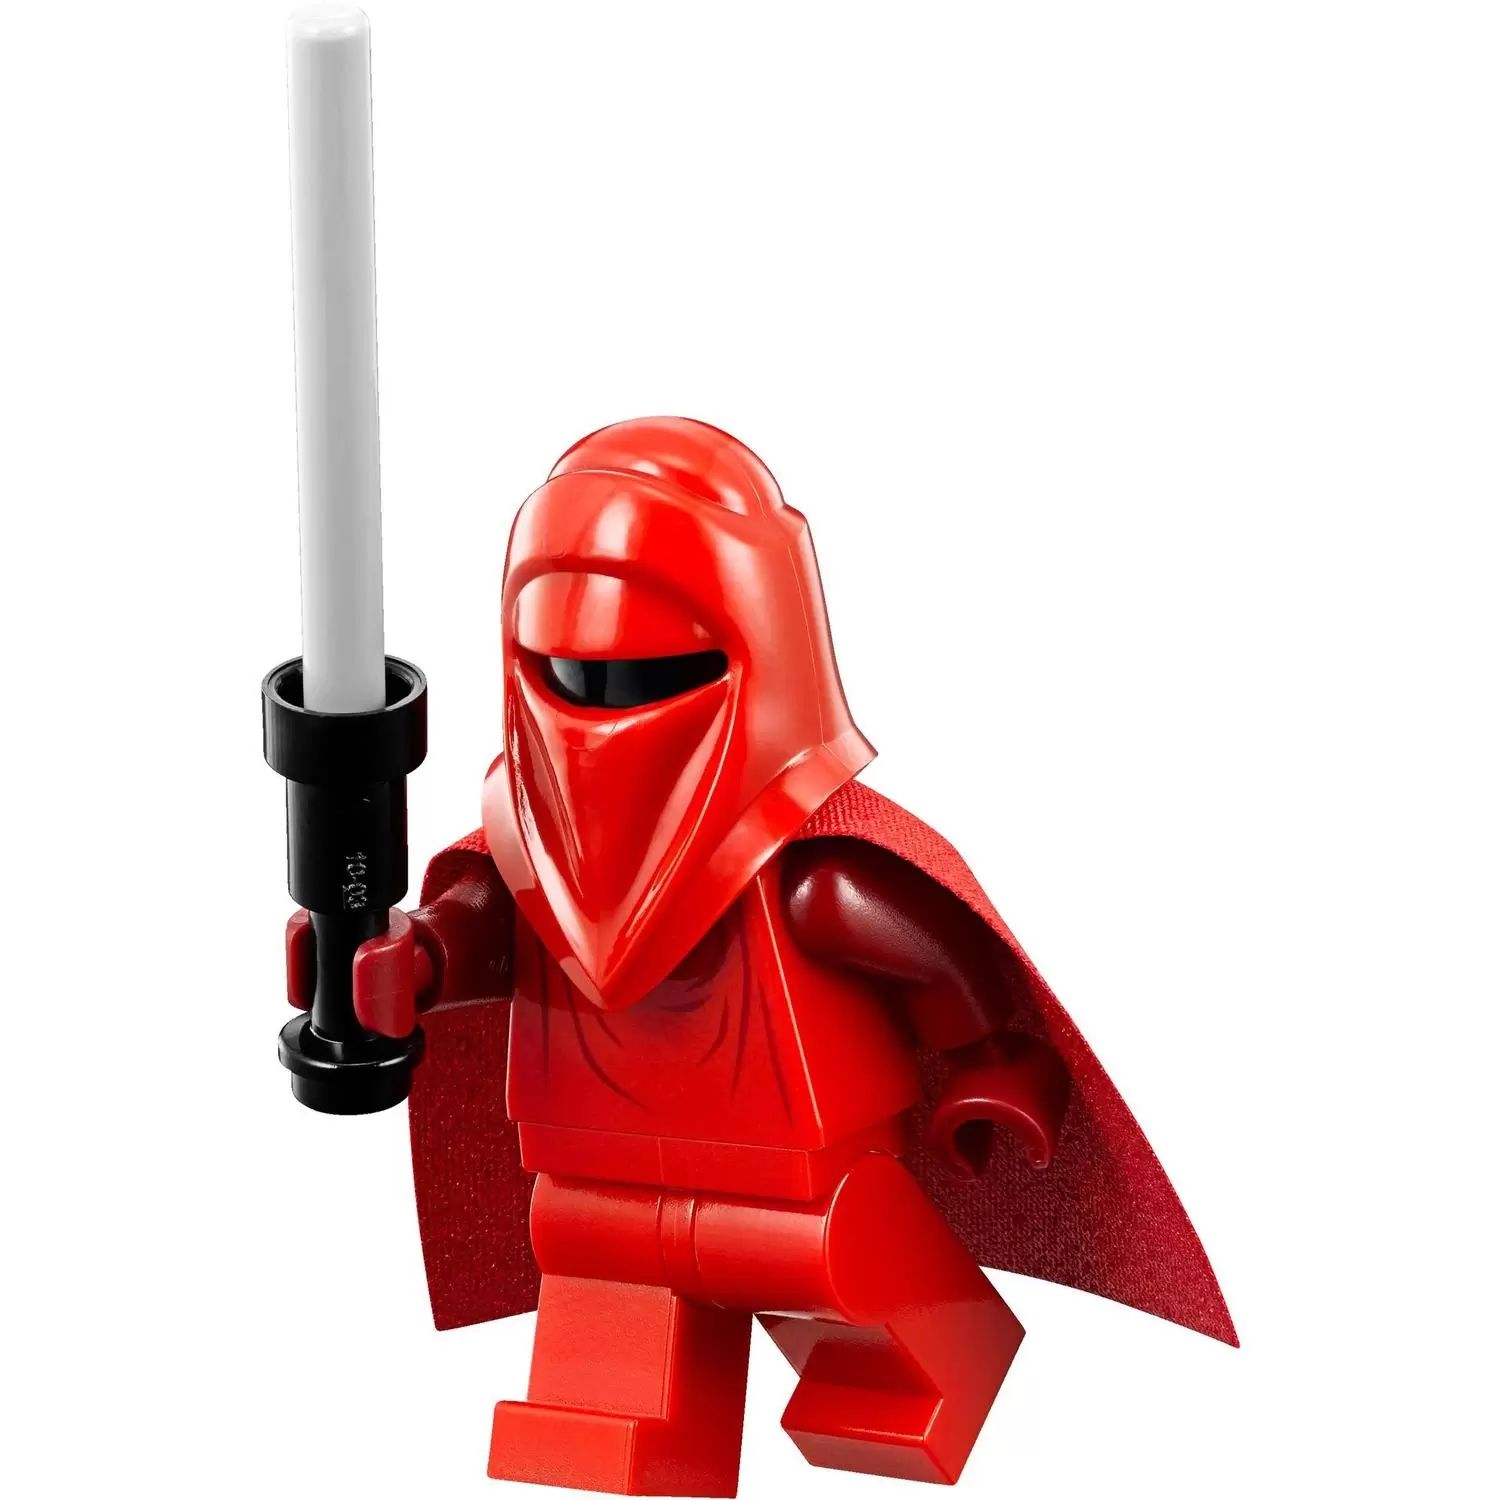 LEGO Star Wars Minifigs - Royal Guard with Dark Red Arms and Hands